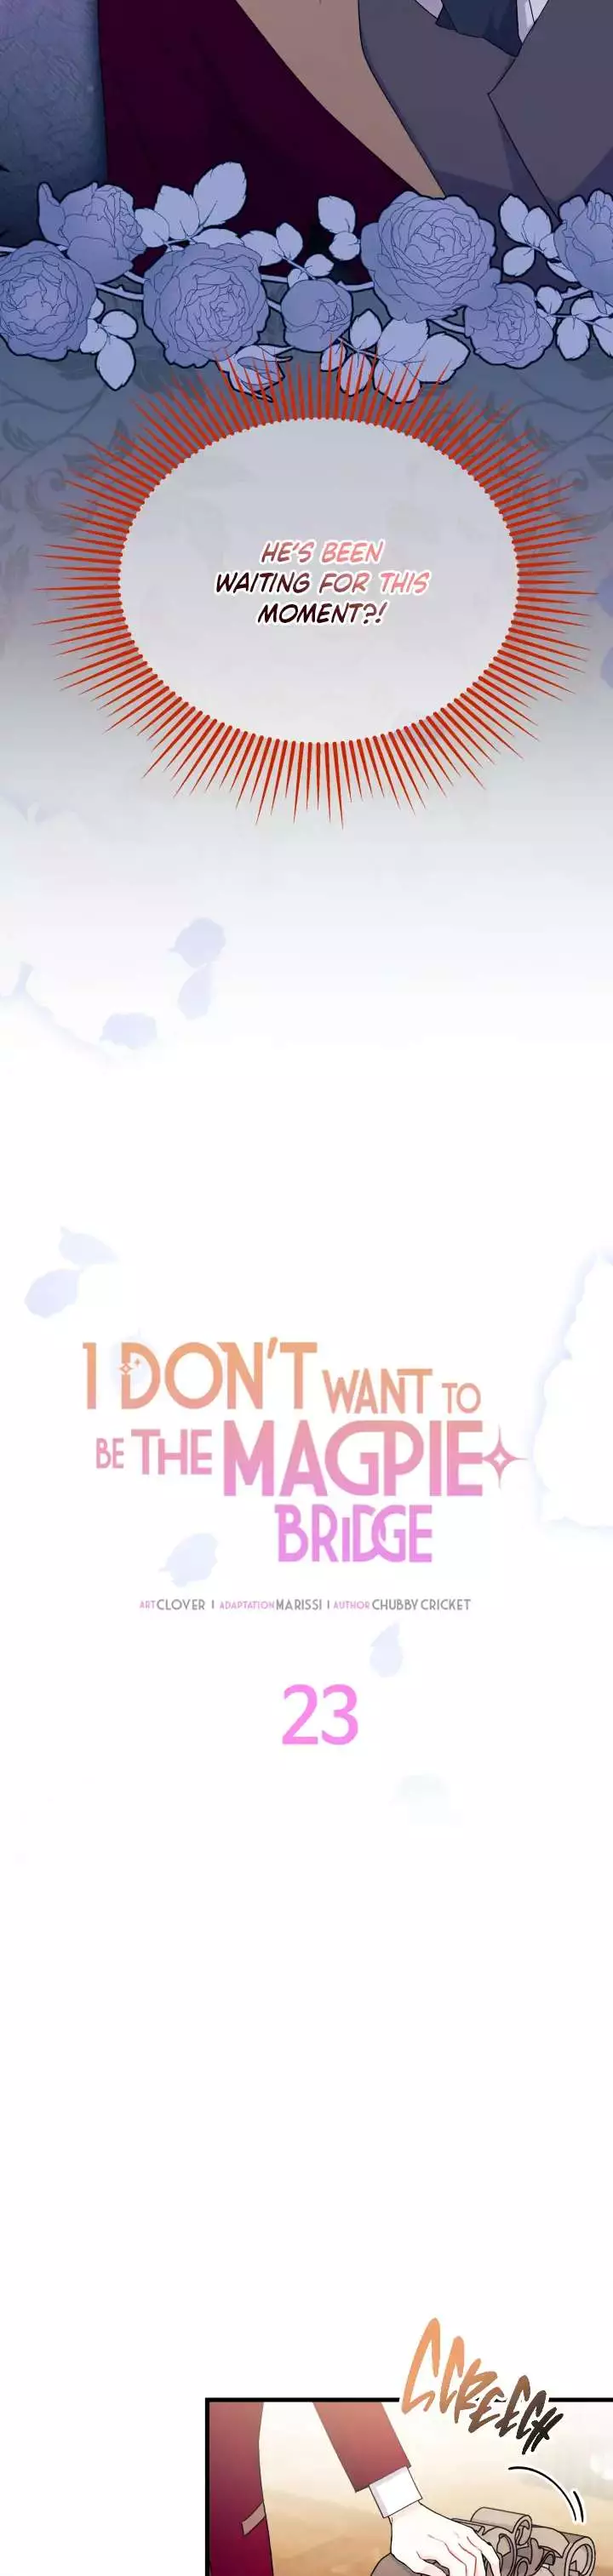 I Don’T Want To Be A Magpie Bridge - 23 page 4-4f6ce725